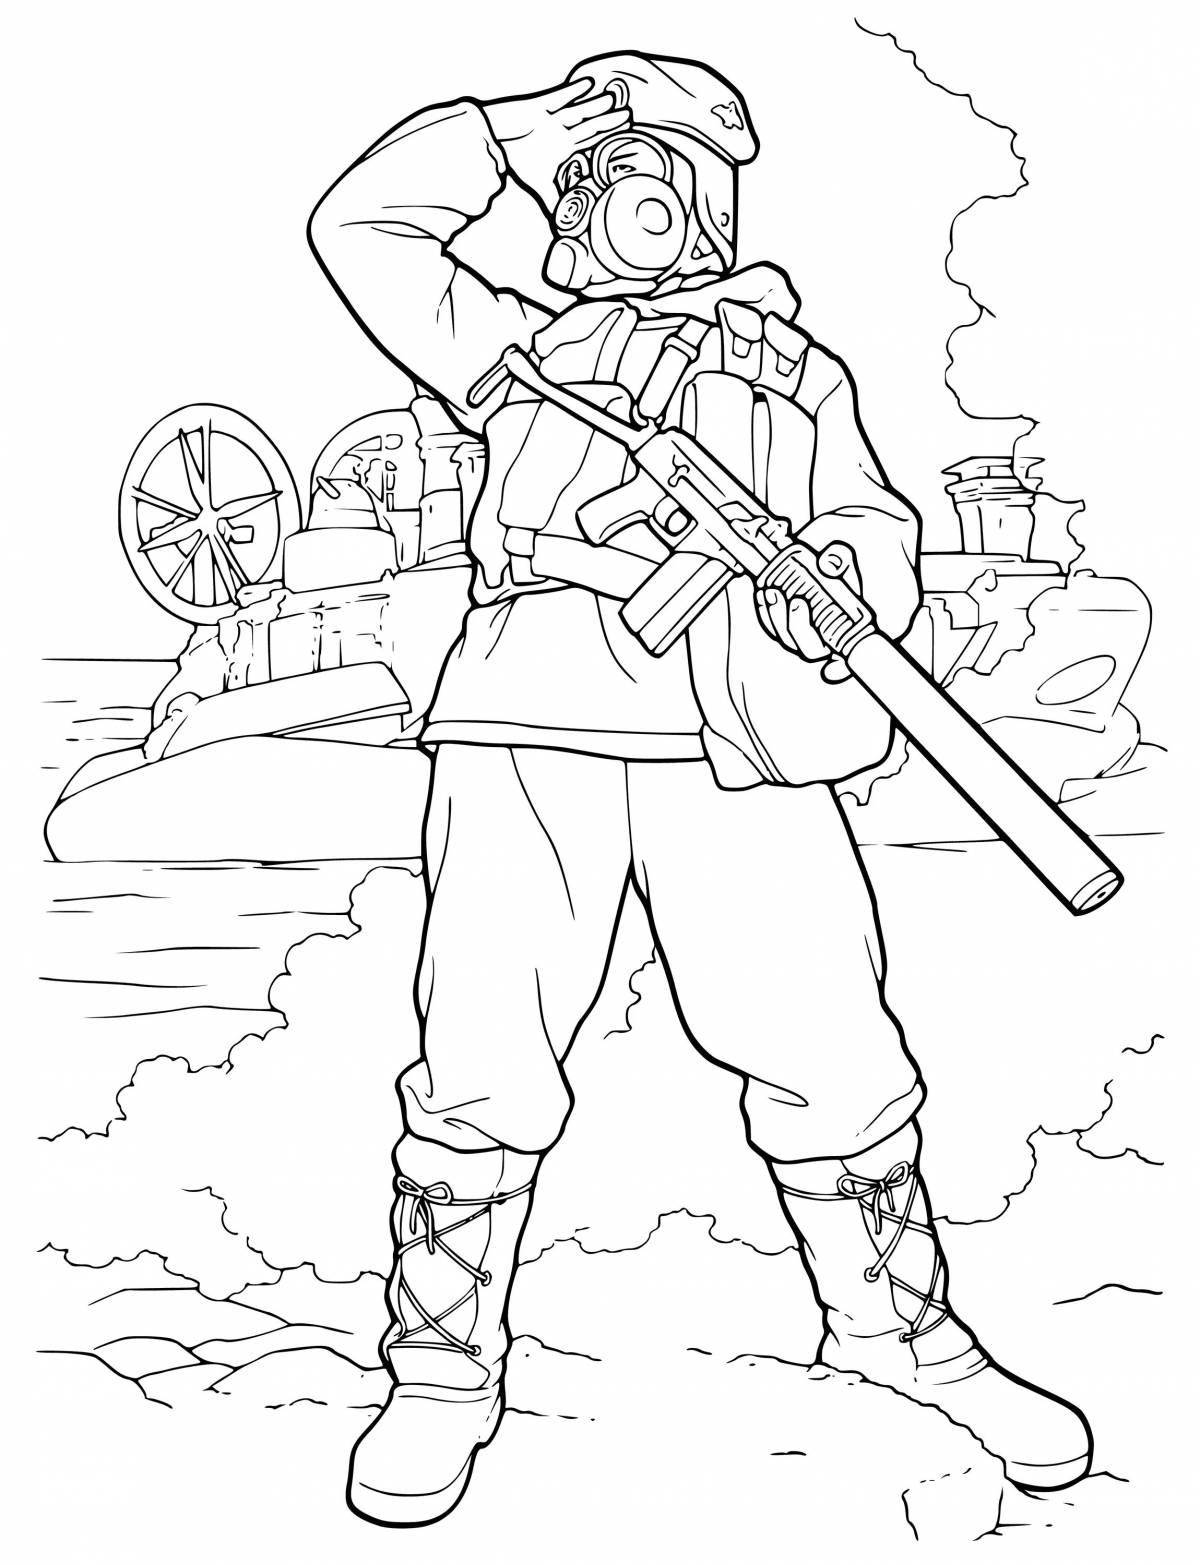 Gorgeous Russian soldier coloring page